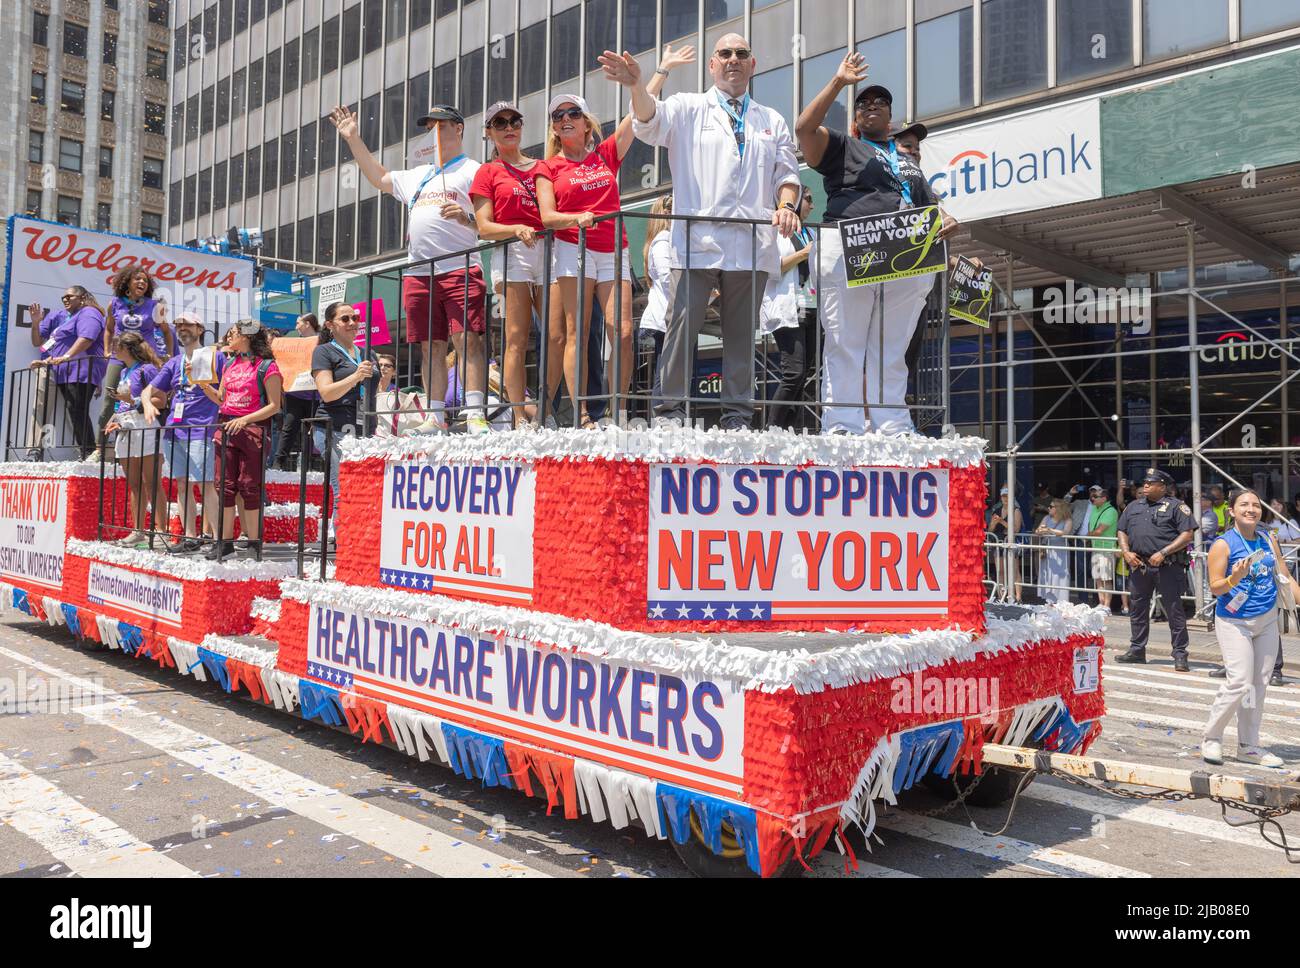 NEW YORK, N.Y. – July 7, 2021: A float honoring health care workers is seen during New York City’s Hometown Heroes ticker tape parade. Stock Photo